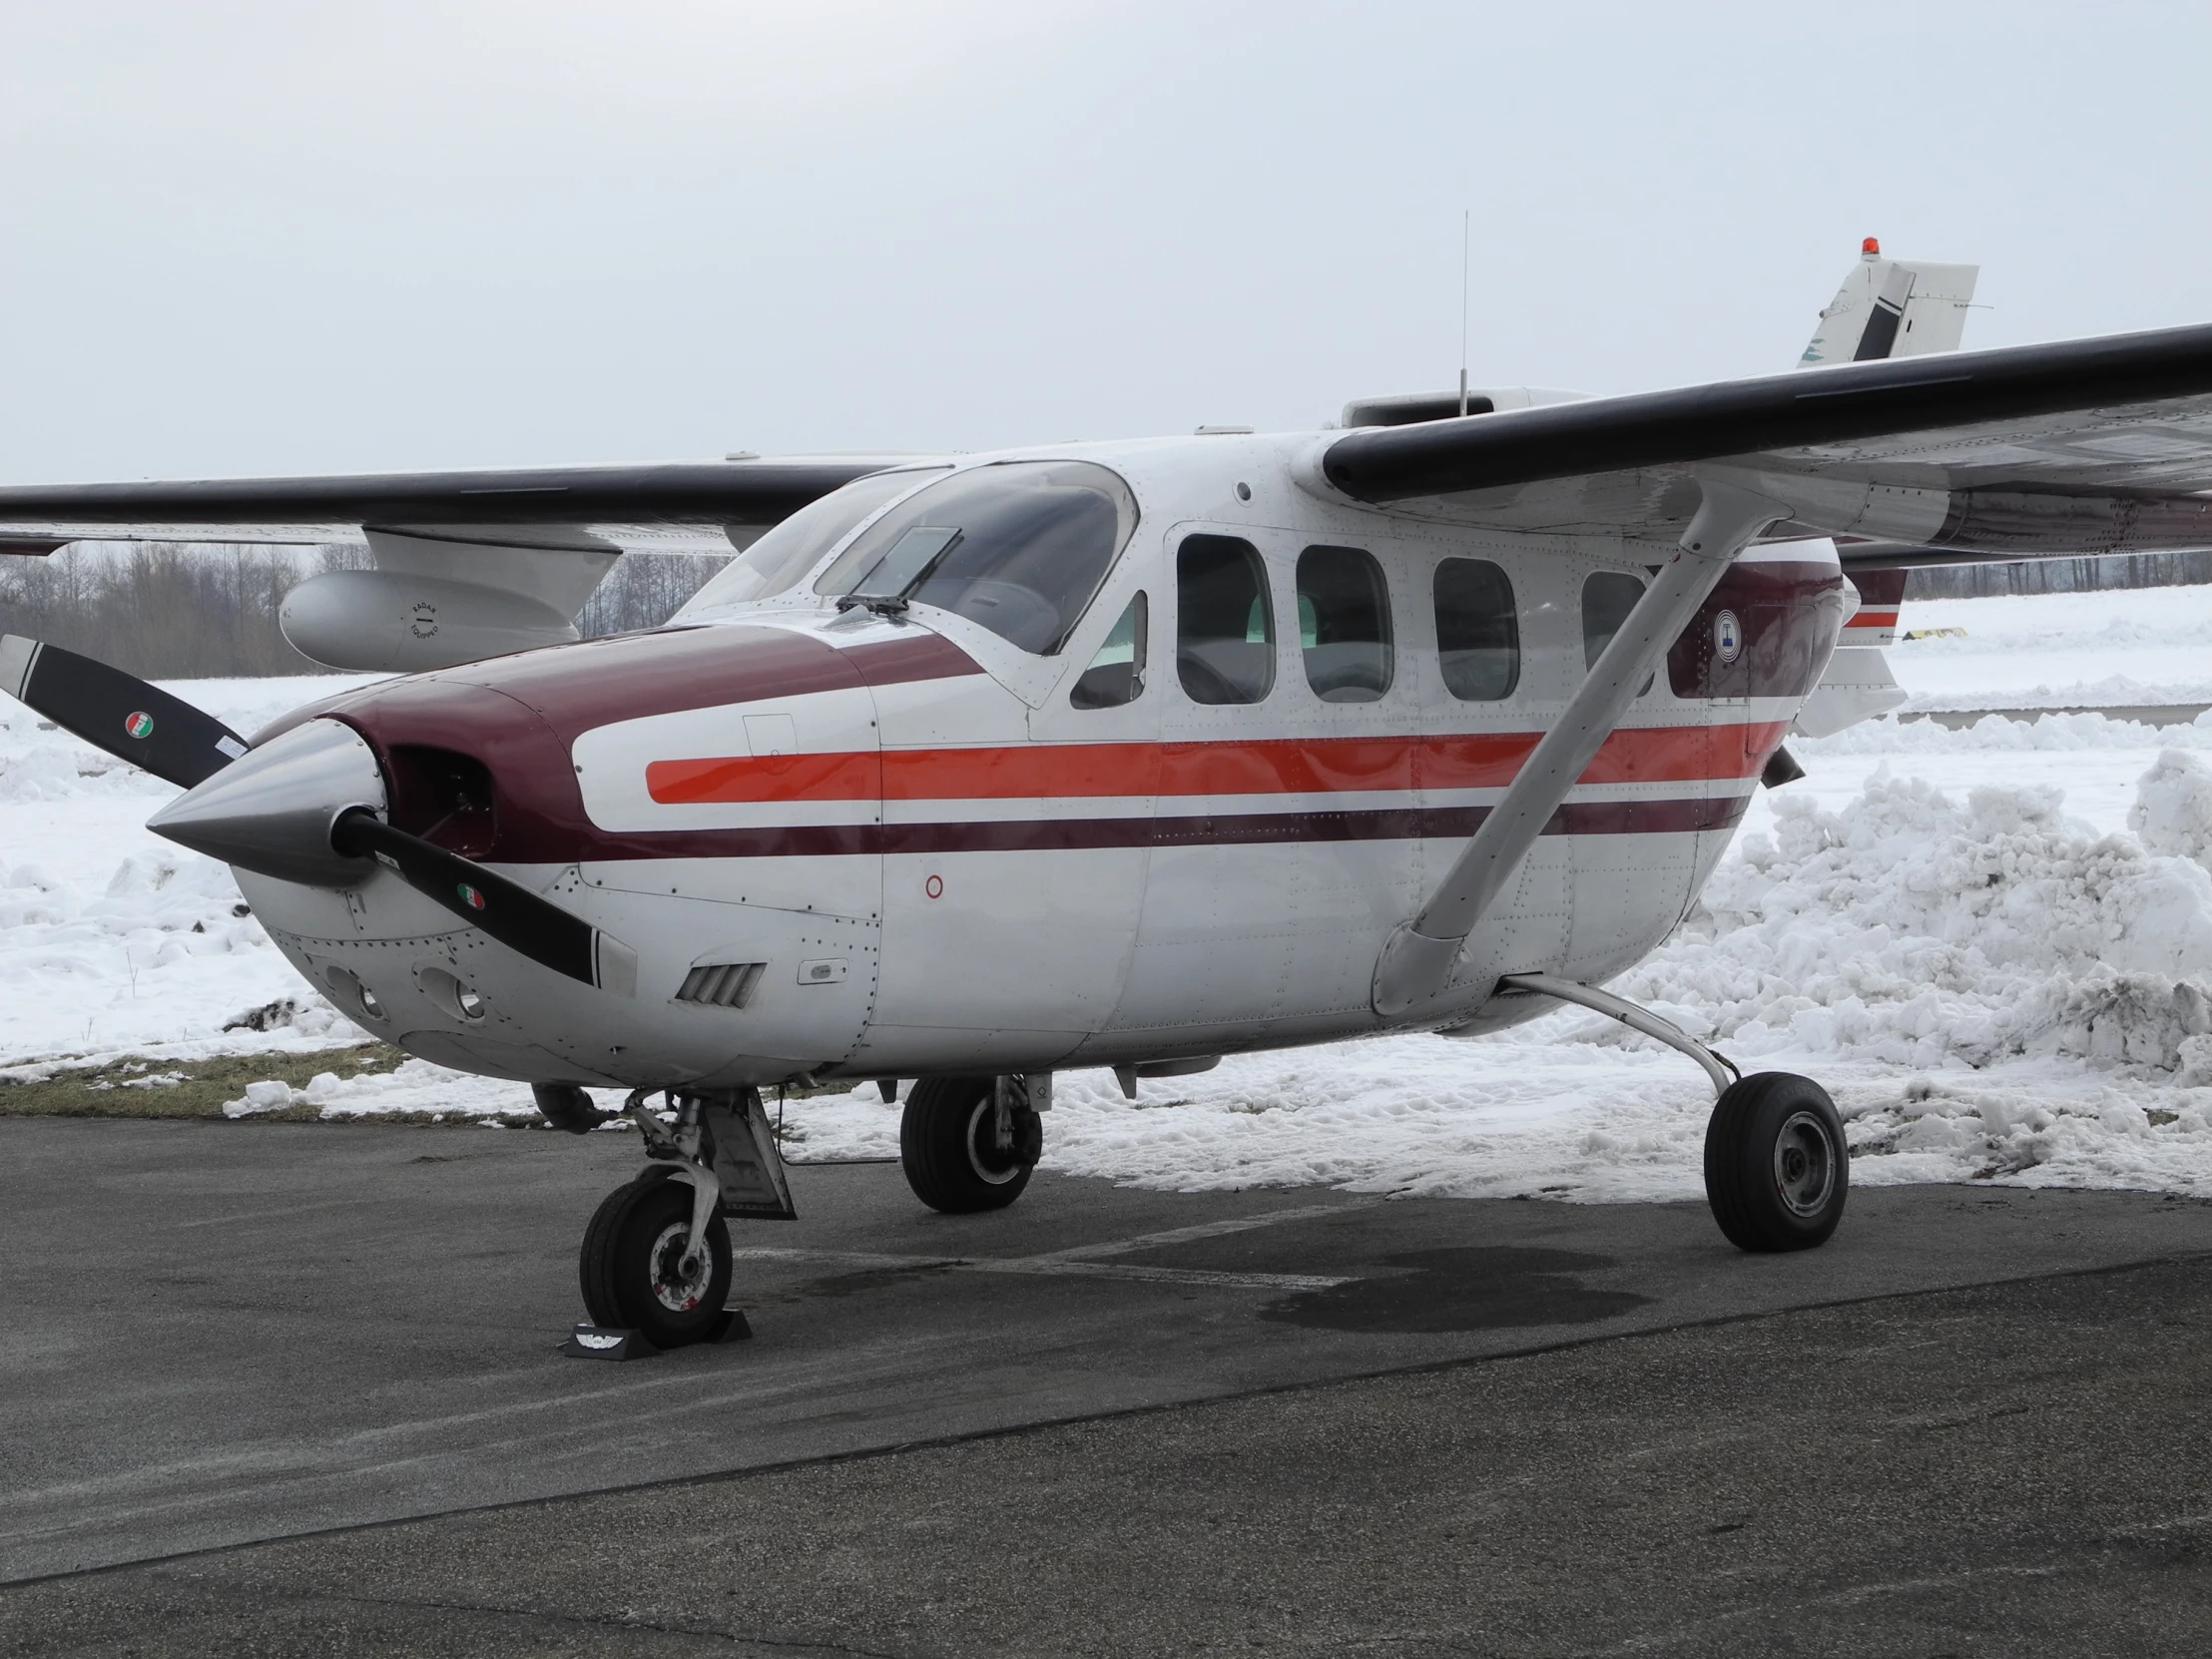 a small red and white plane on tarmac near snow